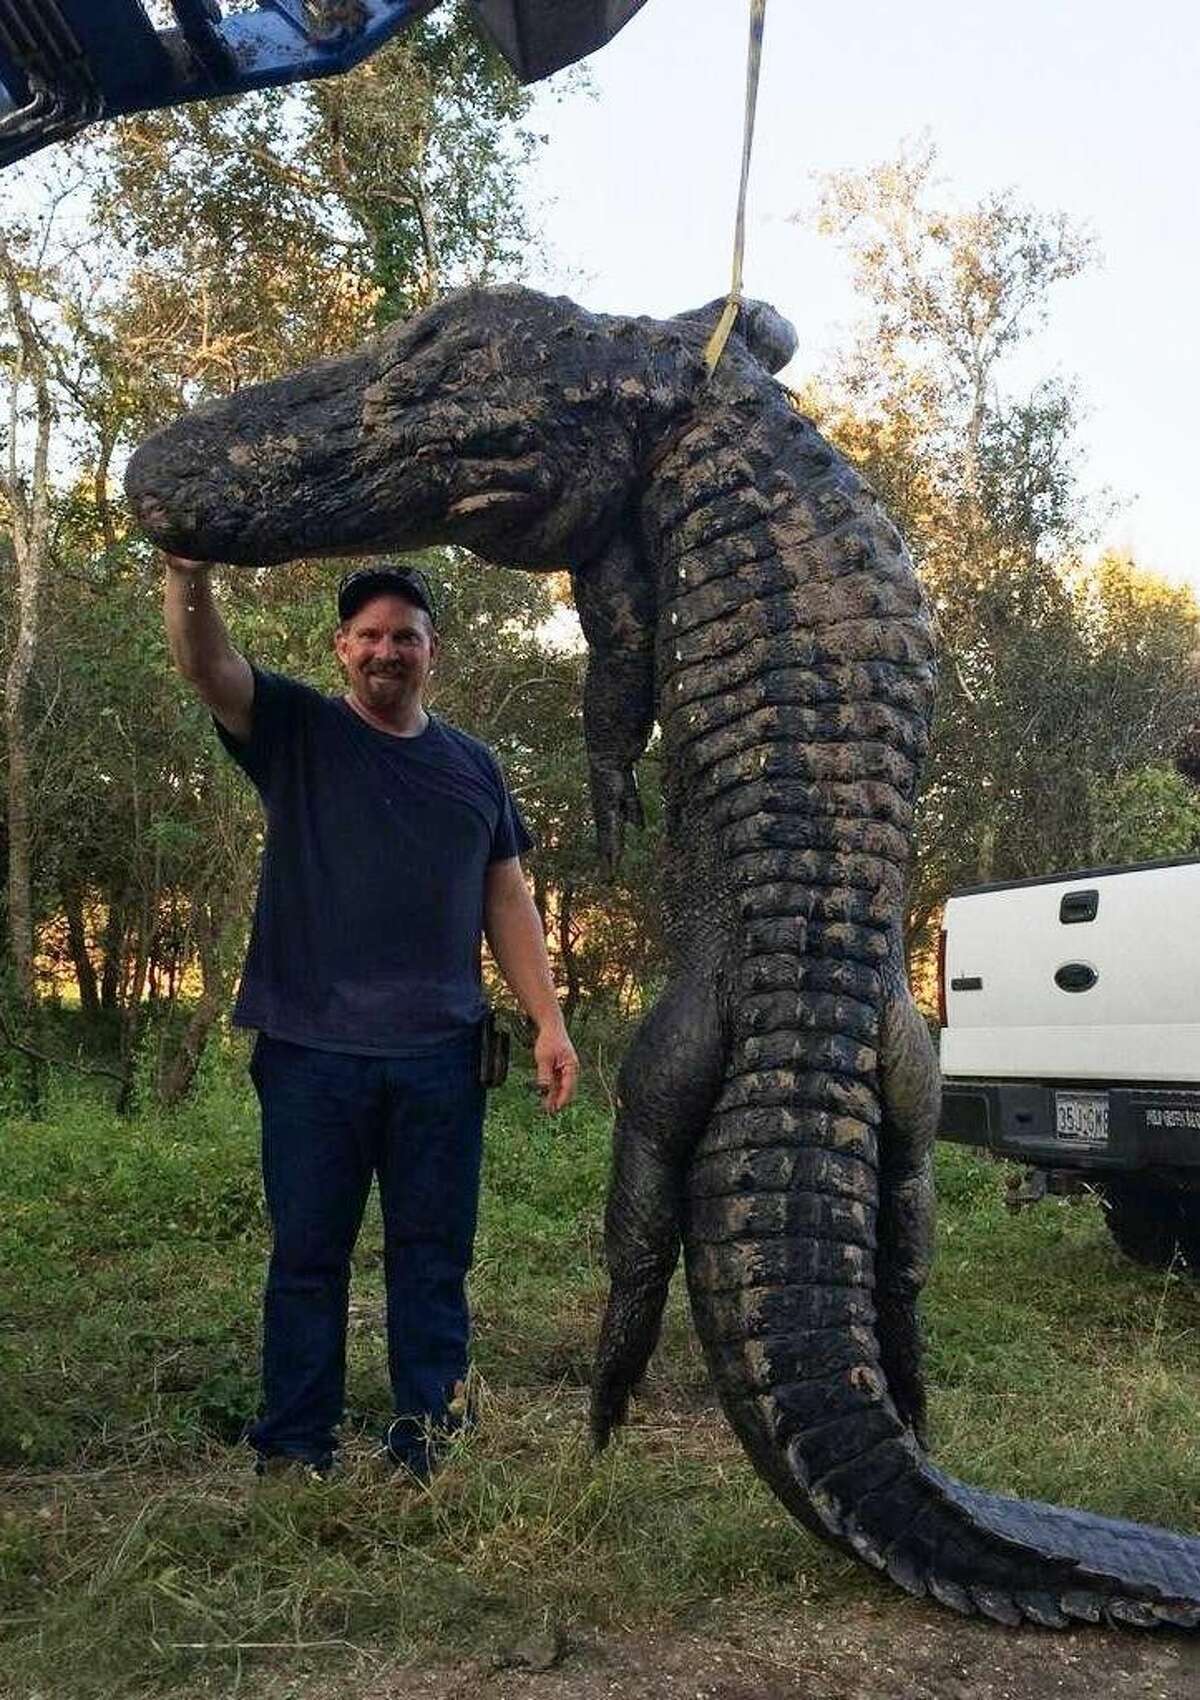 Lee Sanford stands beside the massive alligator he caught Monday afternoon in Day Lake south of Dayton. The gator measured 13 feet, 8.5 inches and weighed between 800 and 1,000 lbs.